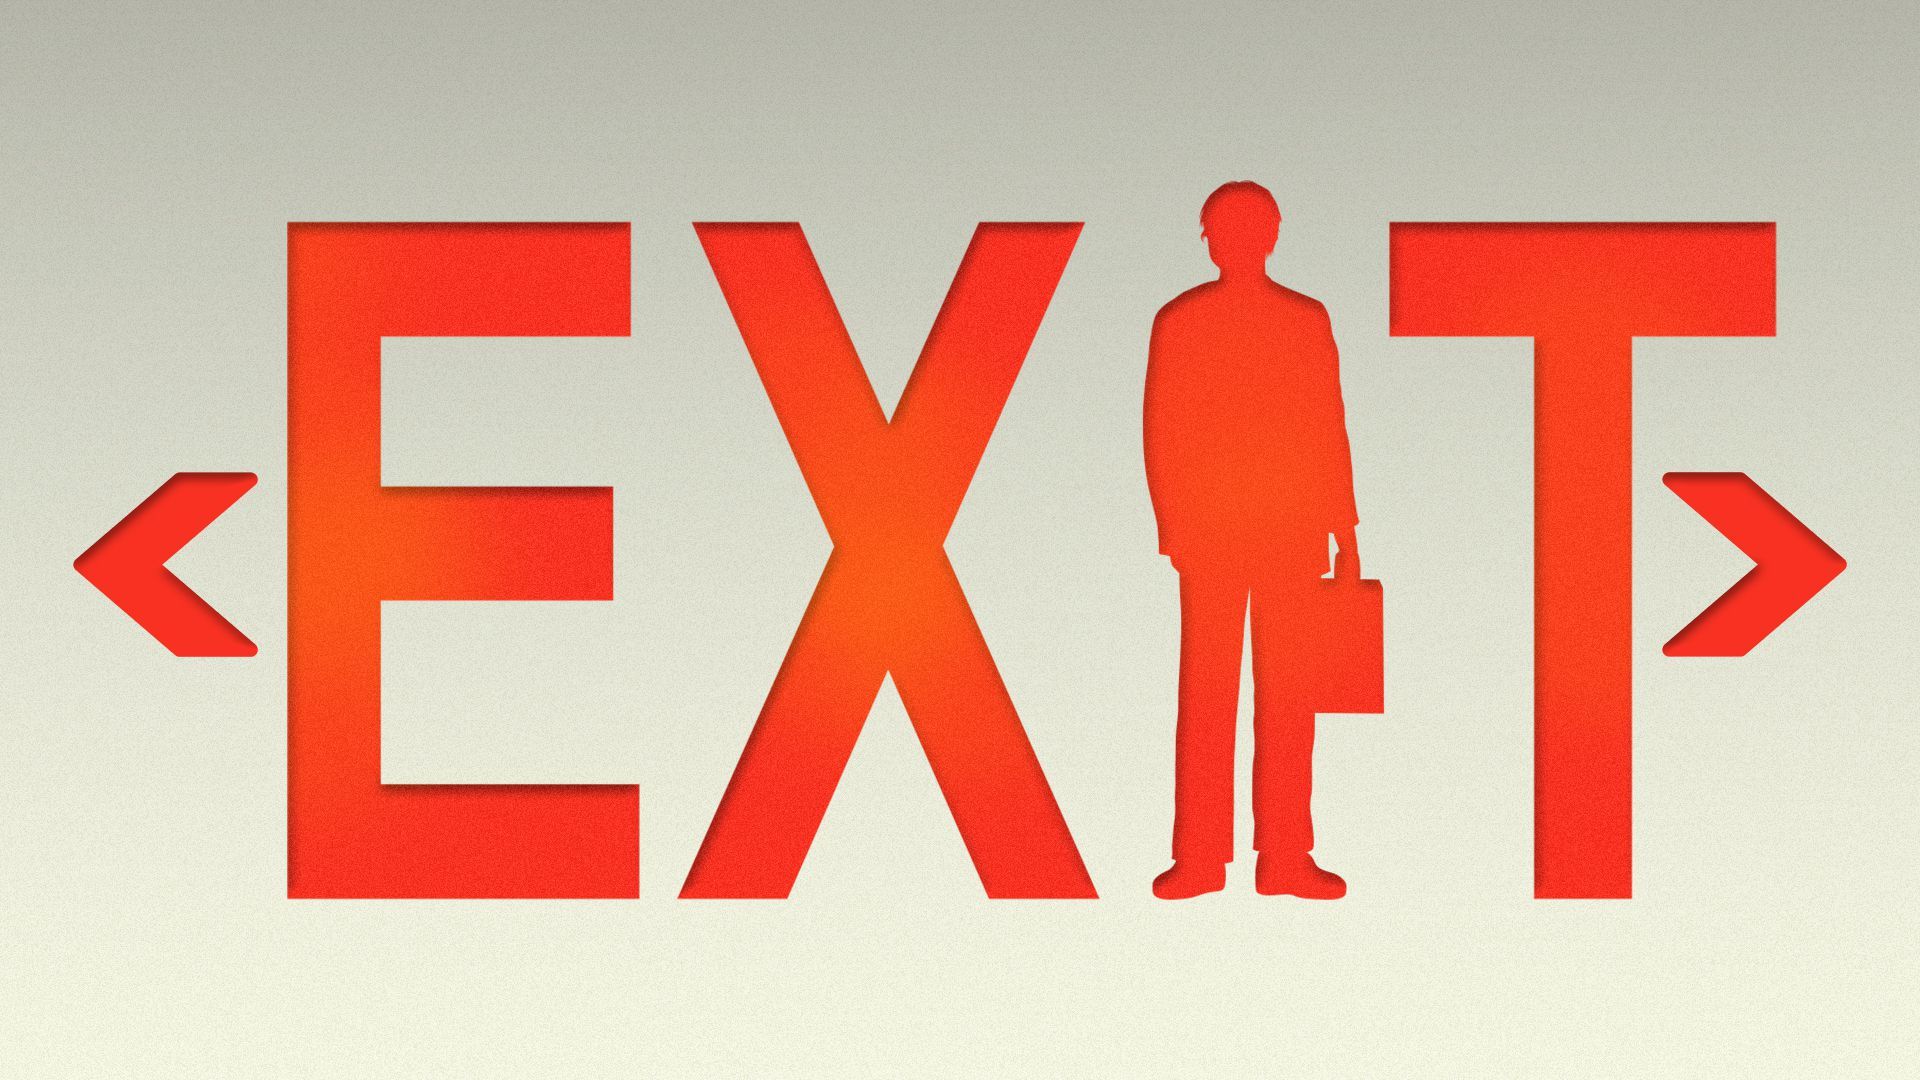 Illustration of an exit sign with a person's silhouette forming the 